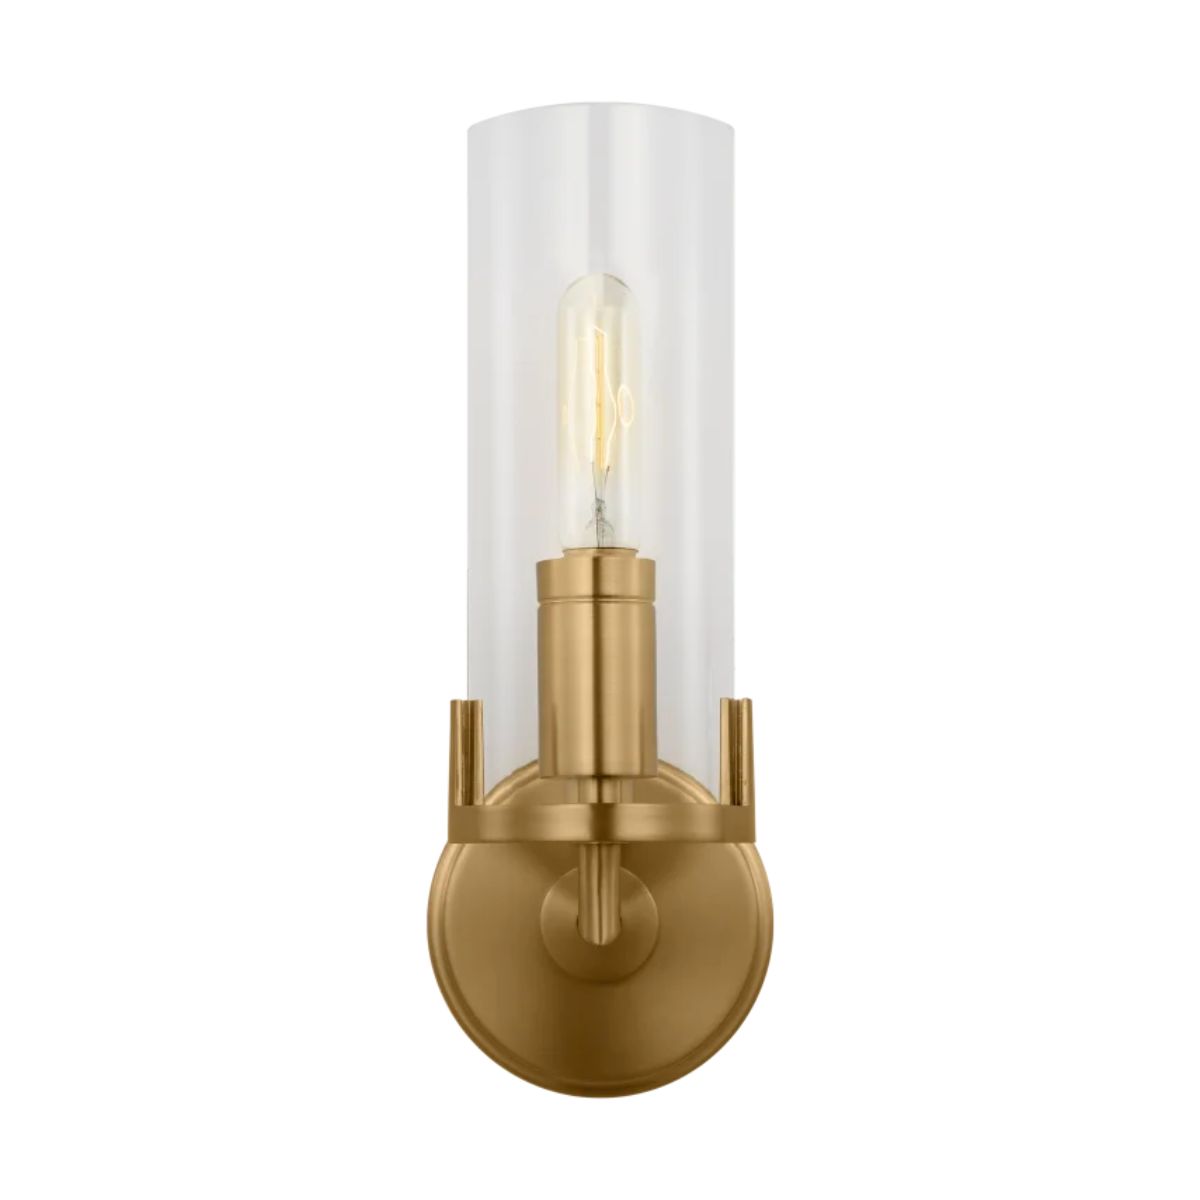 Mezzo 14 in. Armed Sconce Brushed Brass Finish